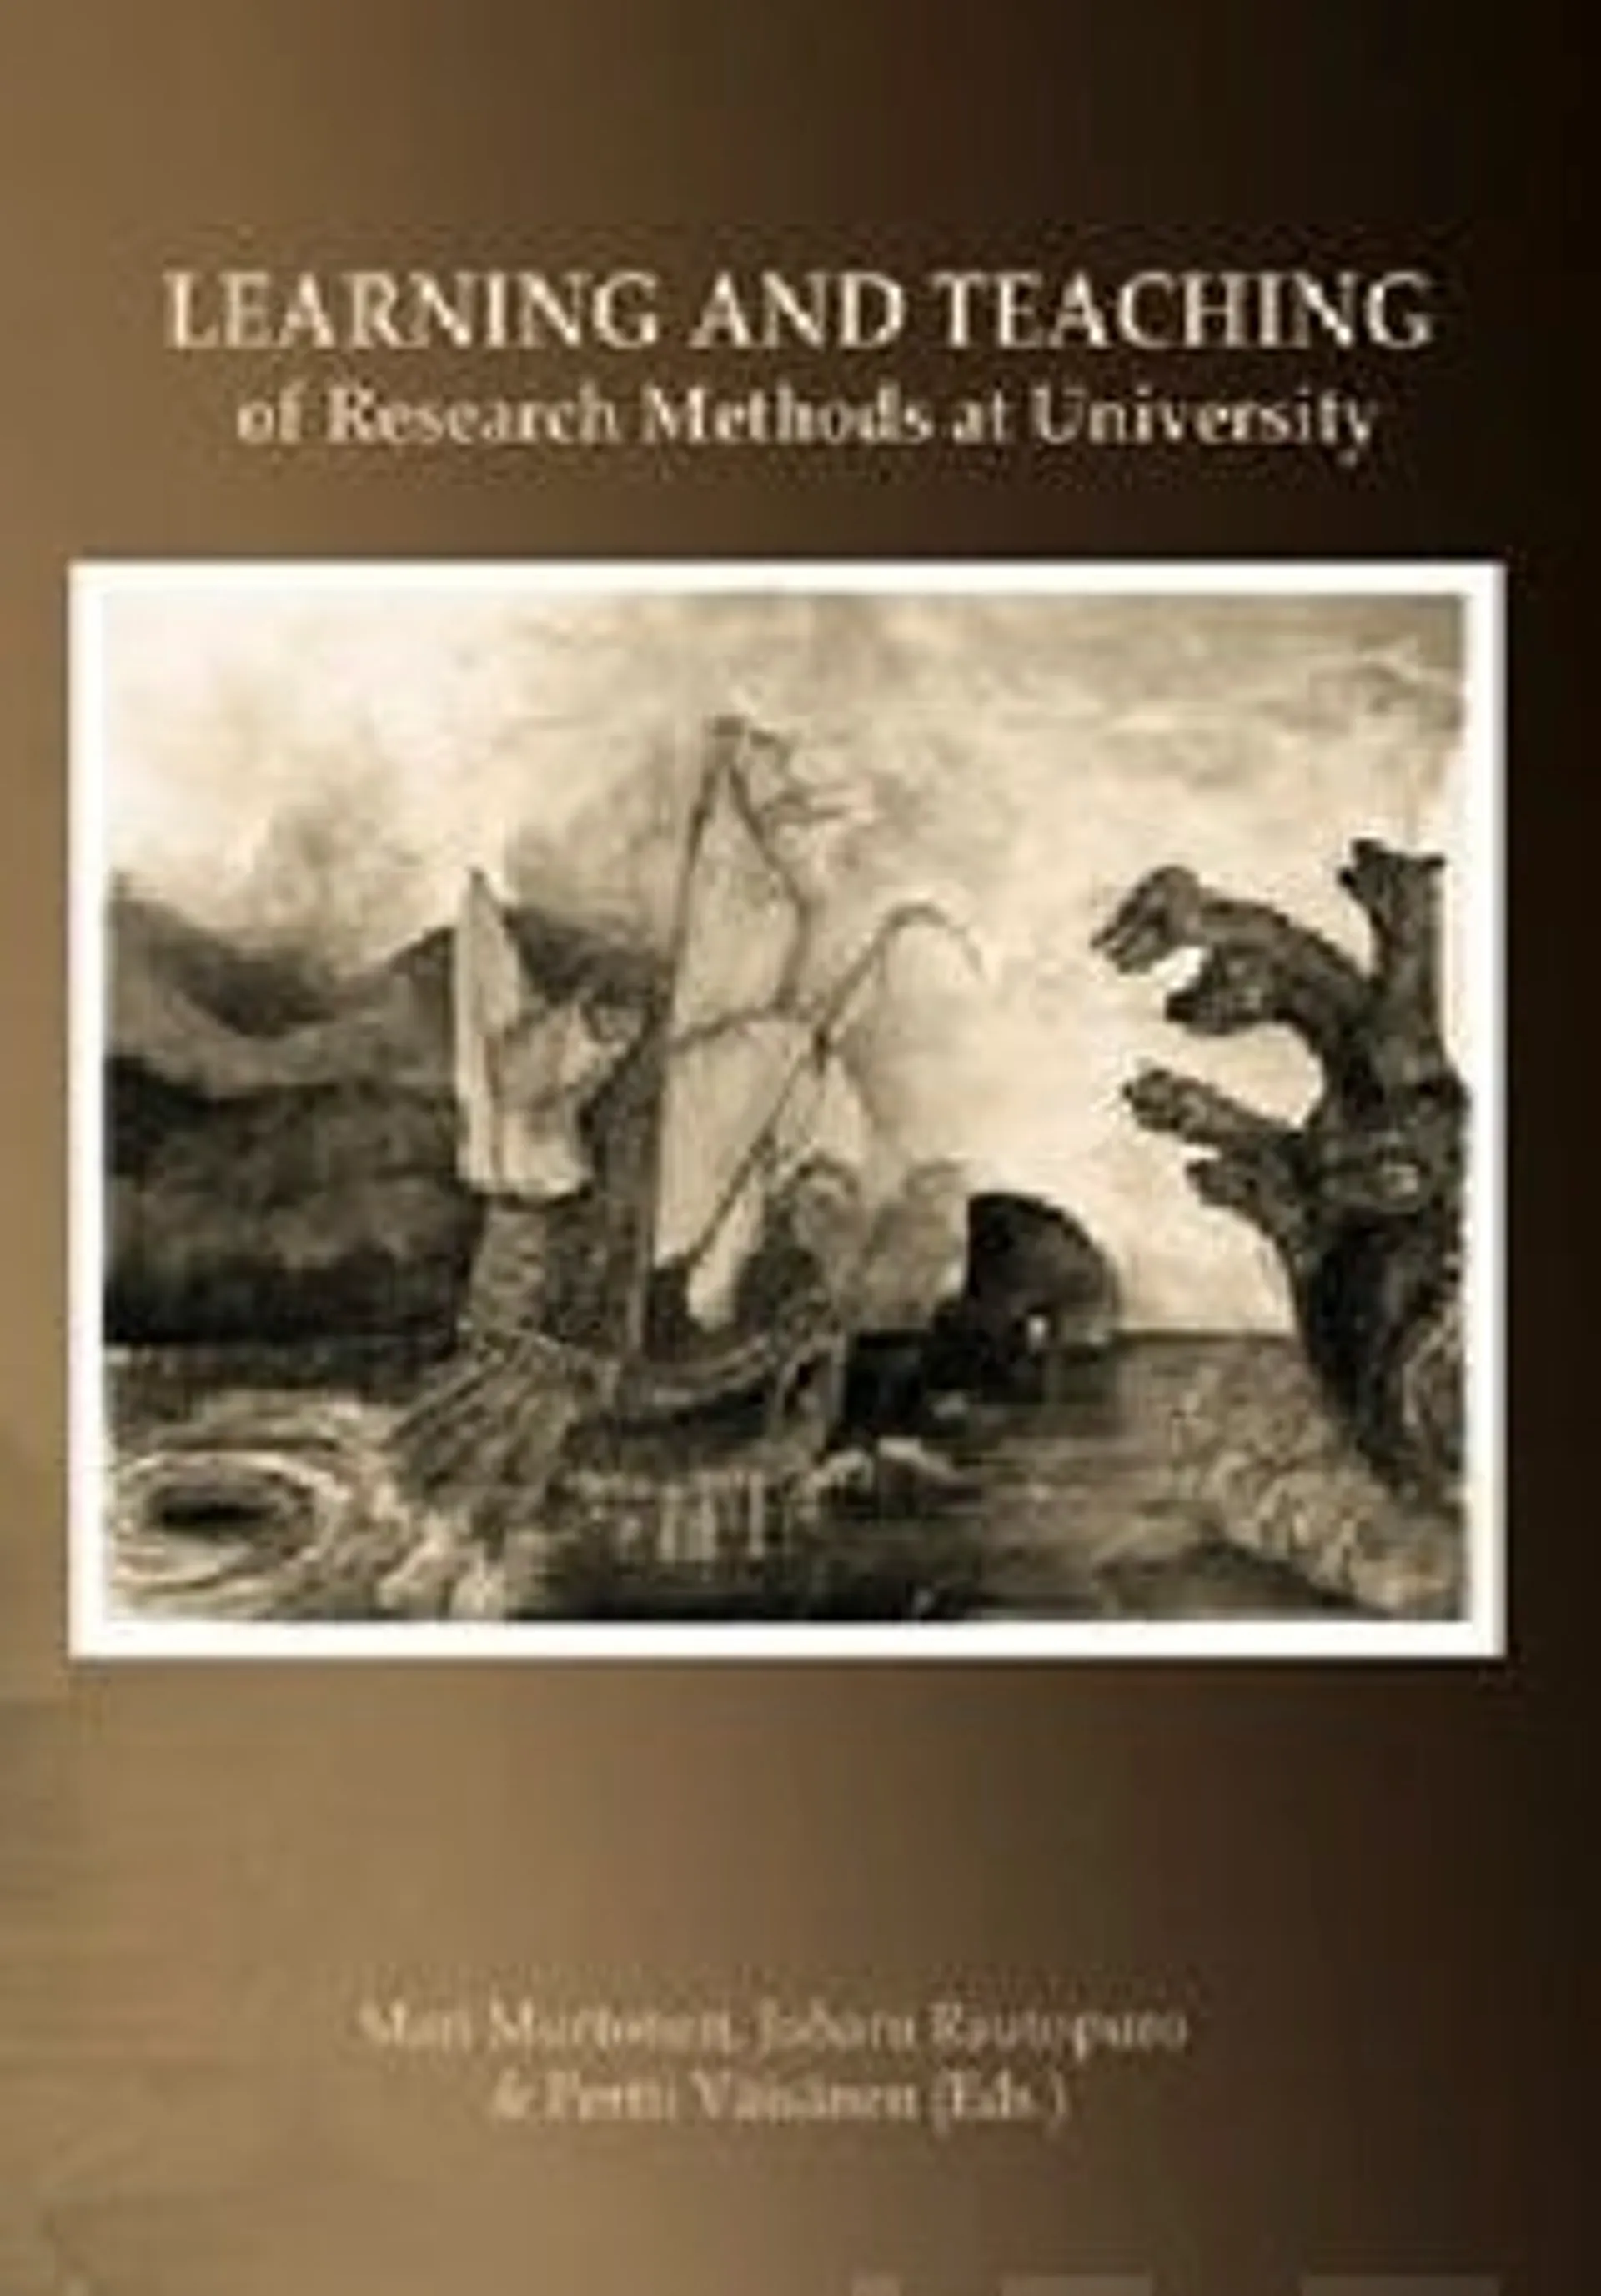 Learning and teaching of research methods at university